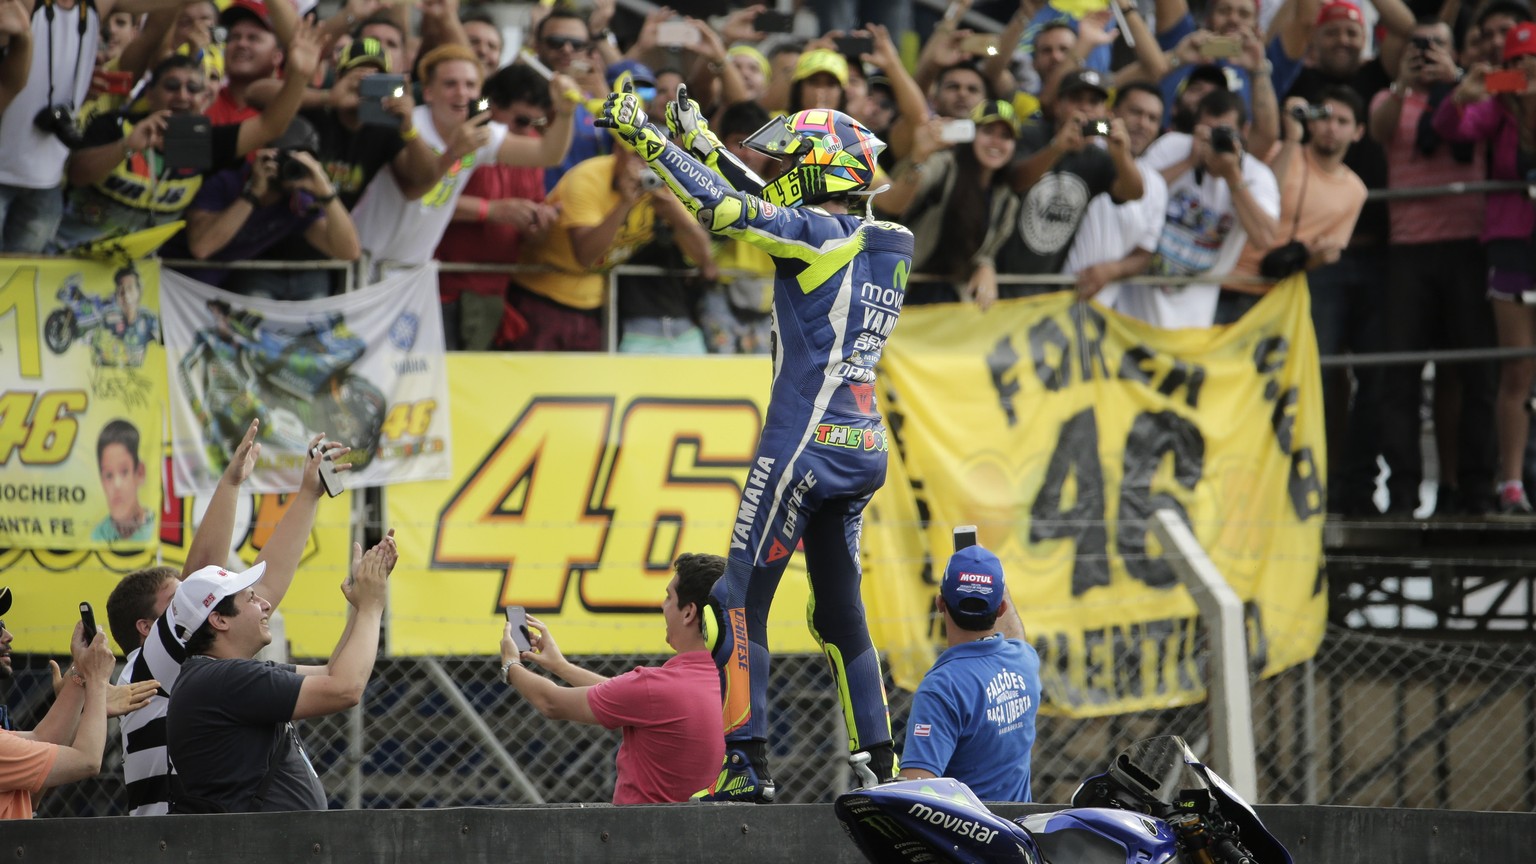 Valentino Rossi of Italy acknowledges the fans after finishing second in the Motorcycle Grand Prix at the Termas de Rio Hondo circuit in Argentina, Sunday, April 3, 2016. (AP Photo/Victor R. Caivano)